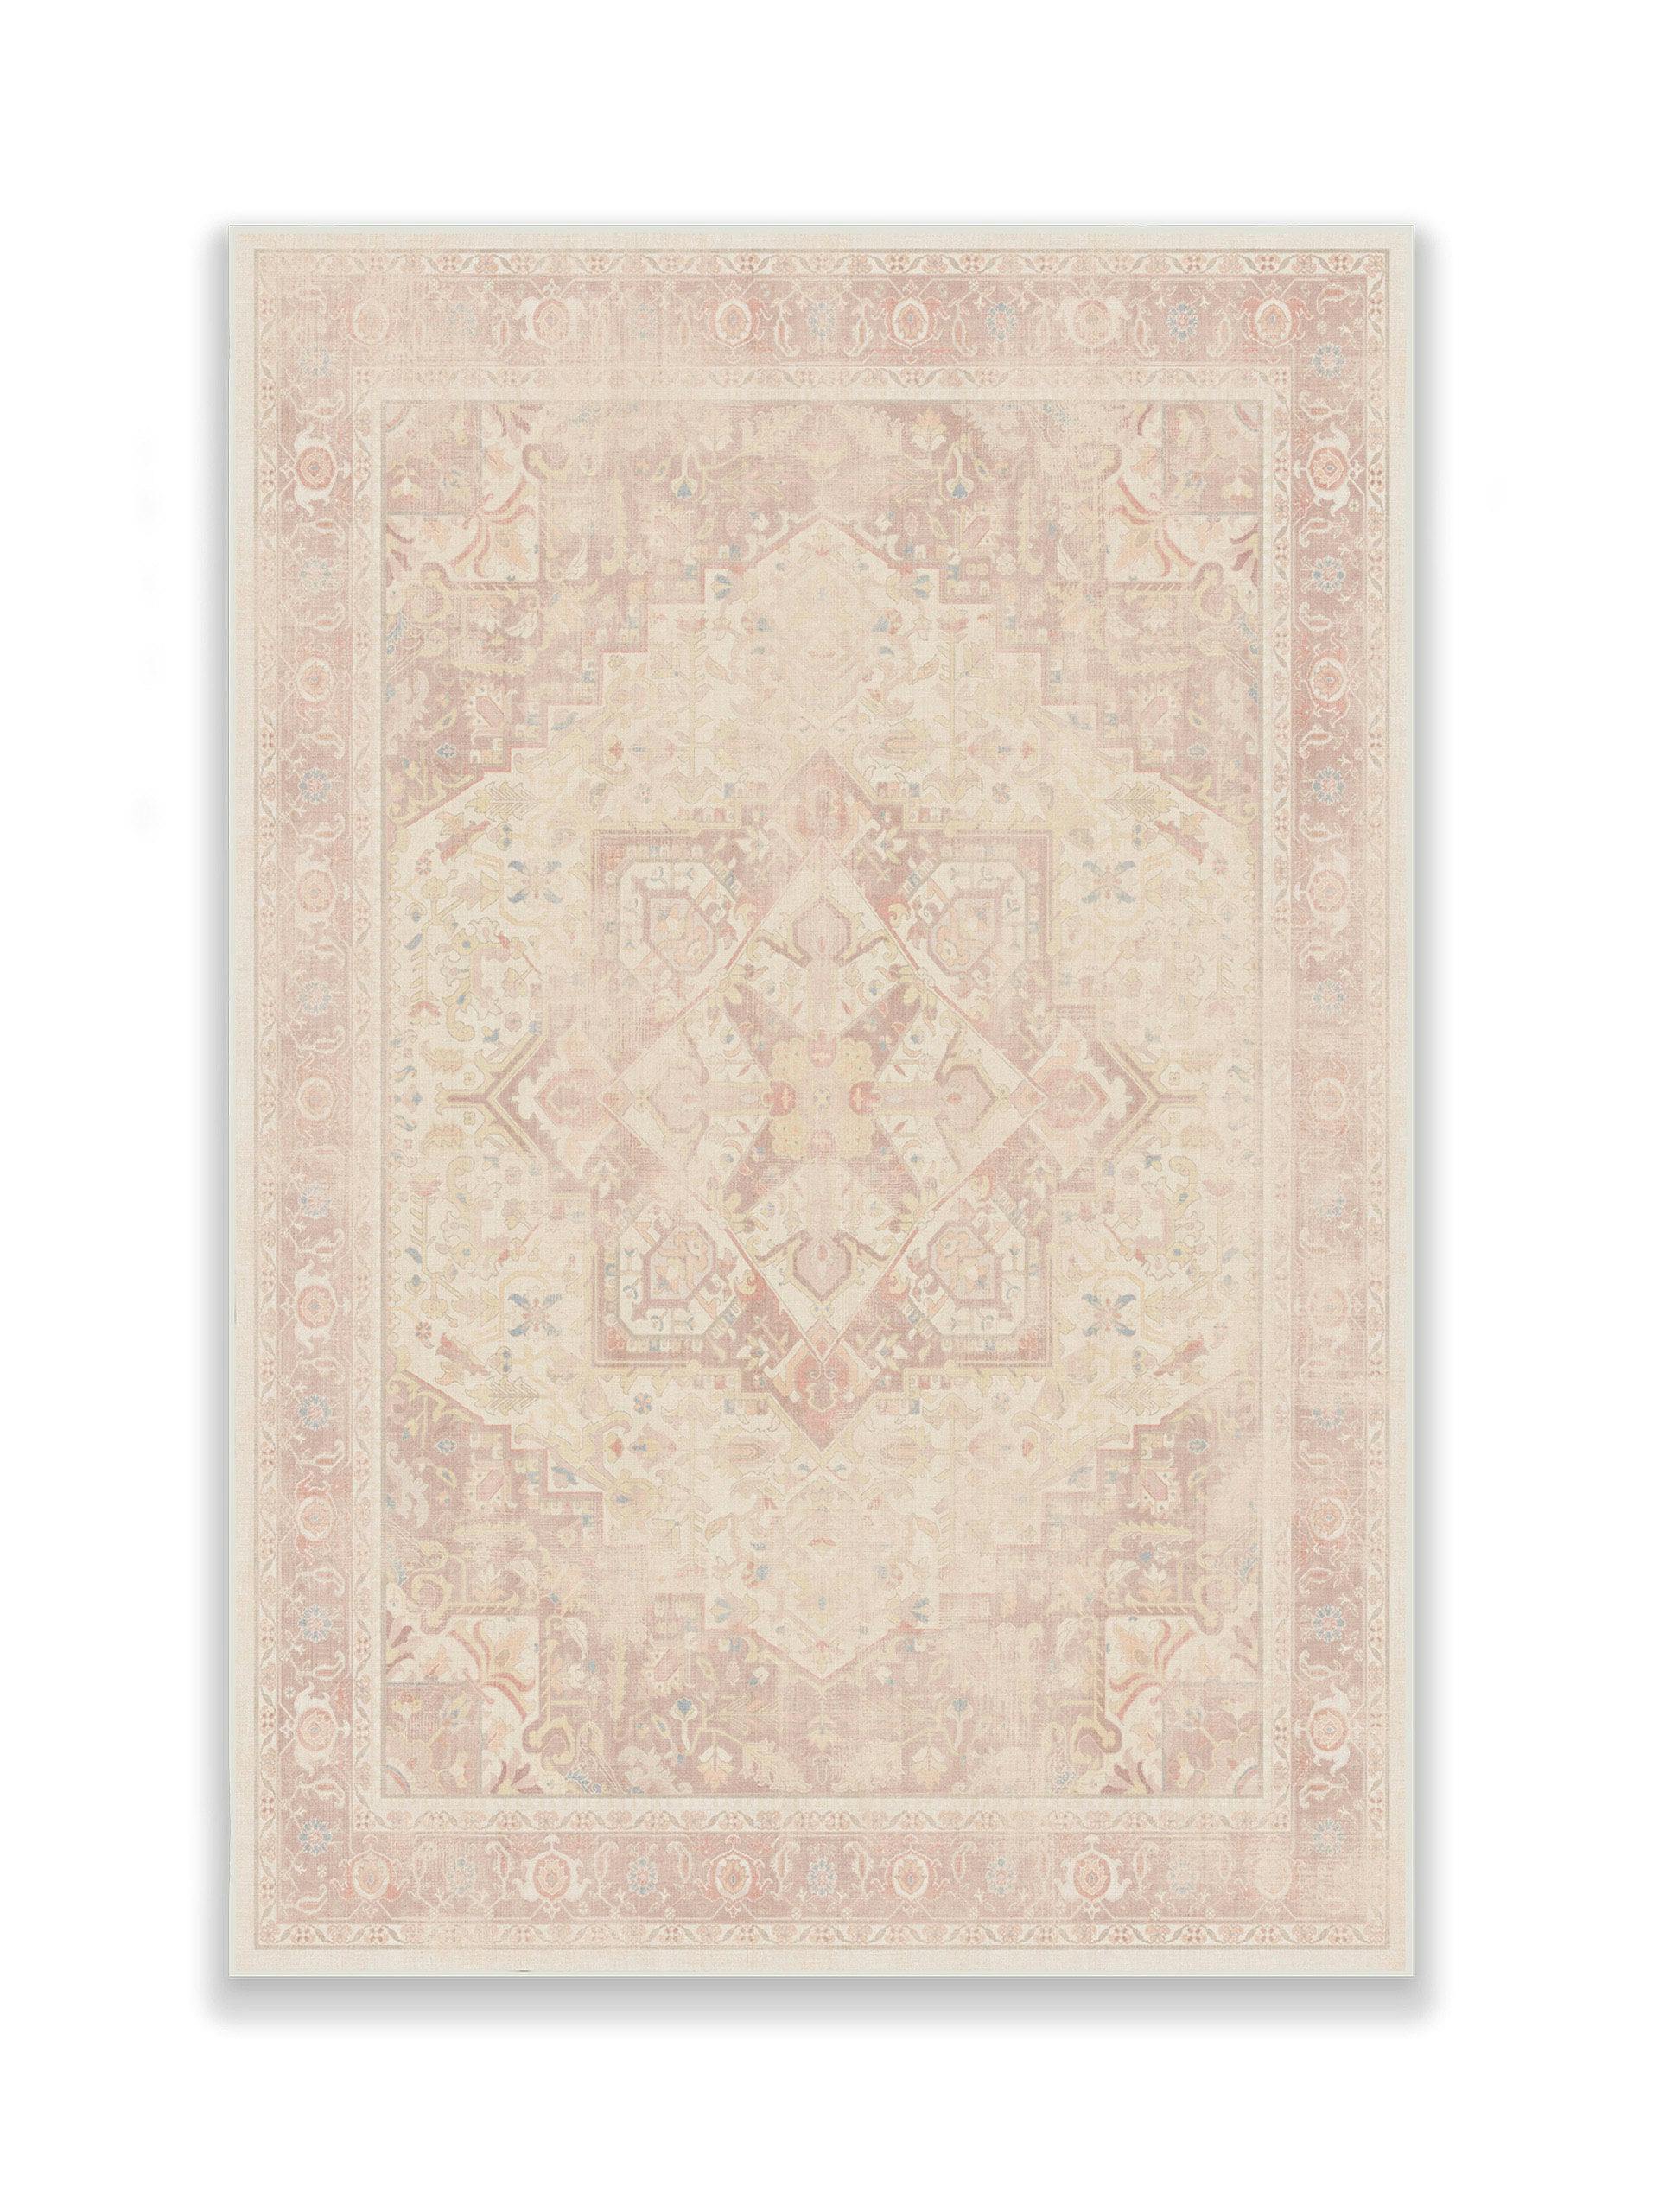 Antique style rug in soft pink